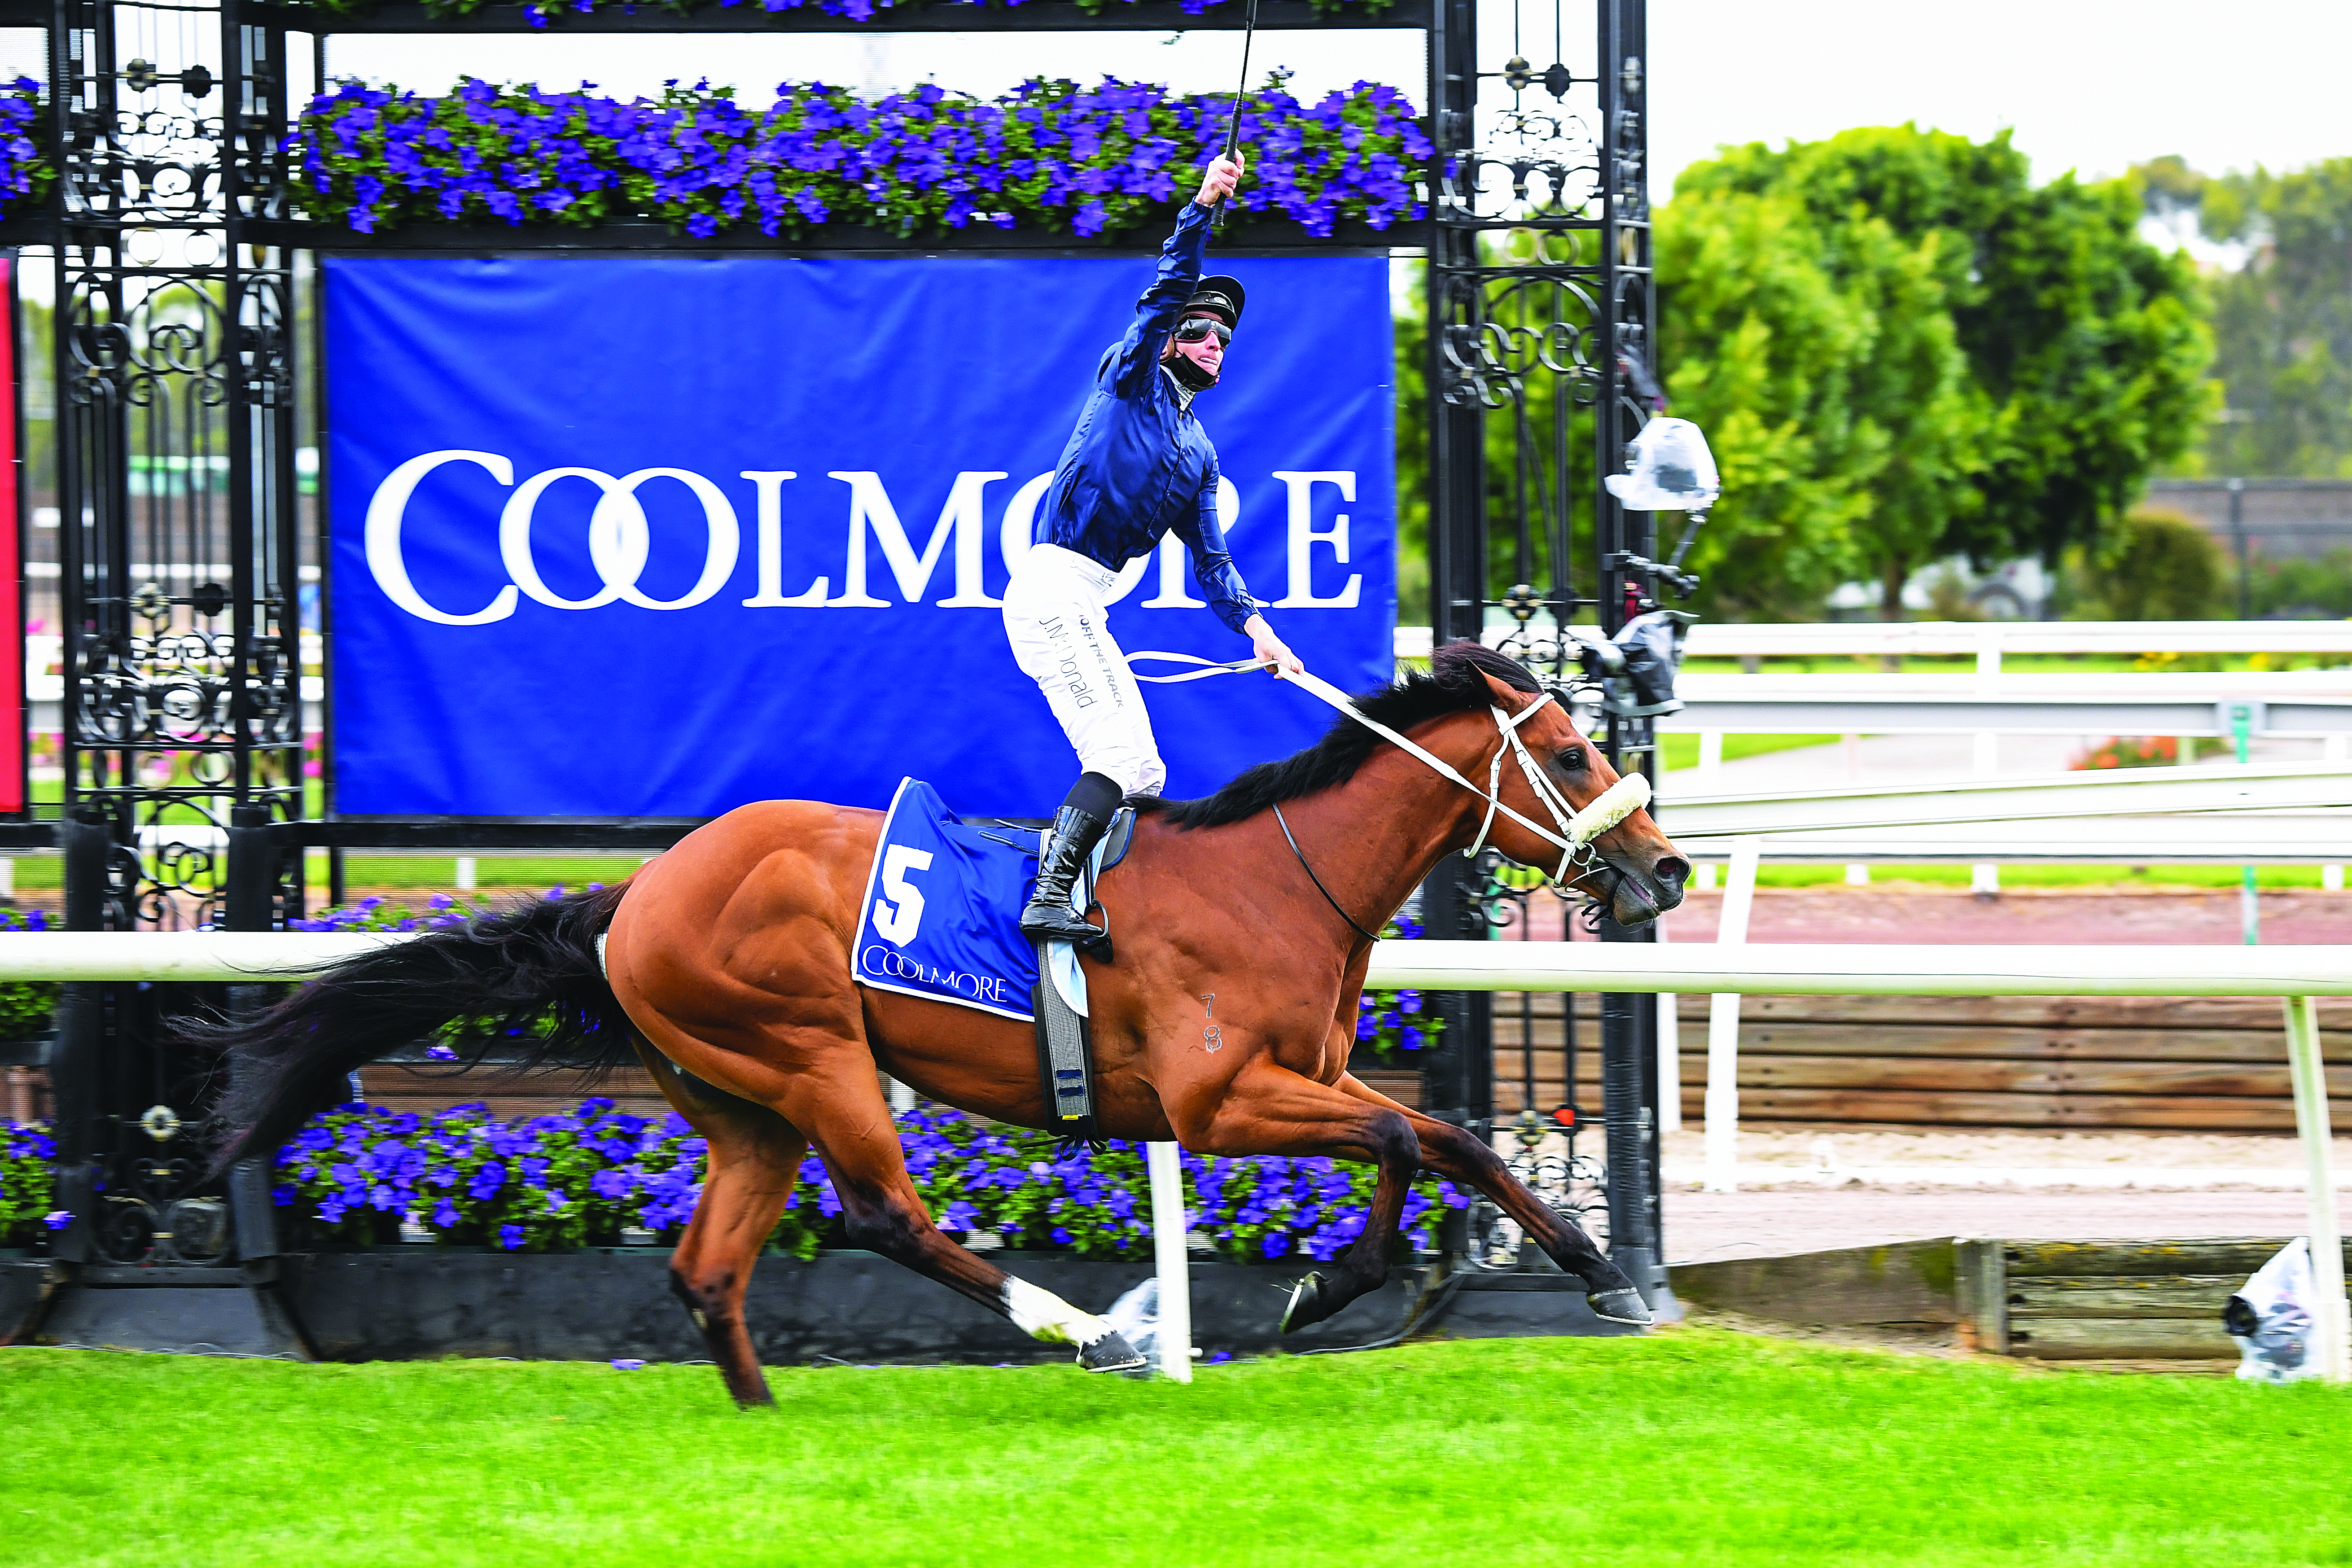 Home Affairs ridden by James McDonald wins the Coolmore Stud Stakes at Flemington Racecourse on October 30, 2021 in Flemington, Australia. (Pat Scala/Racing Photos)